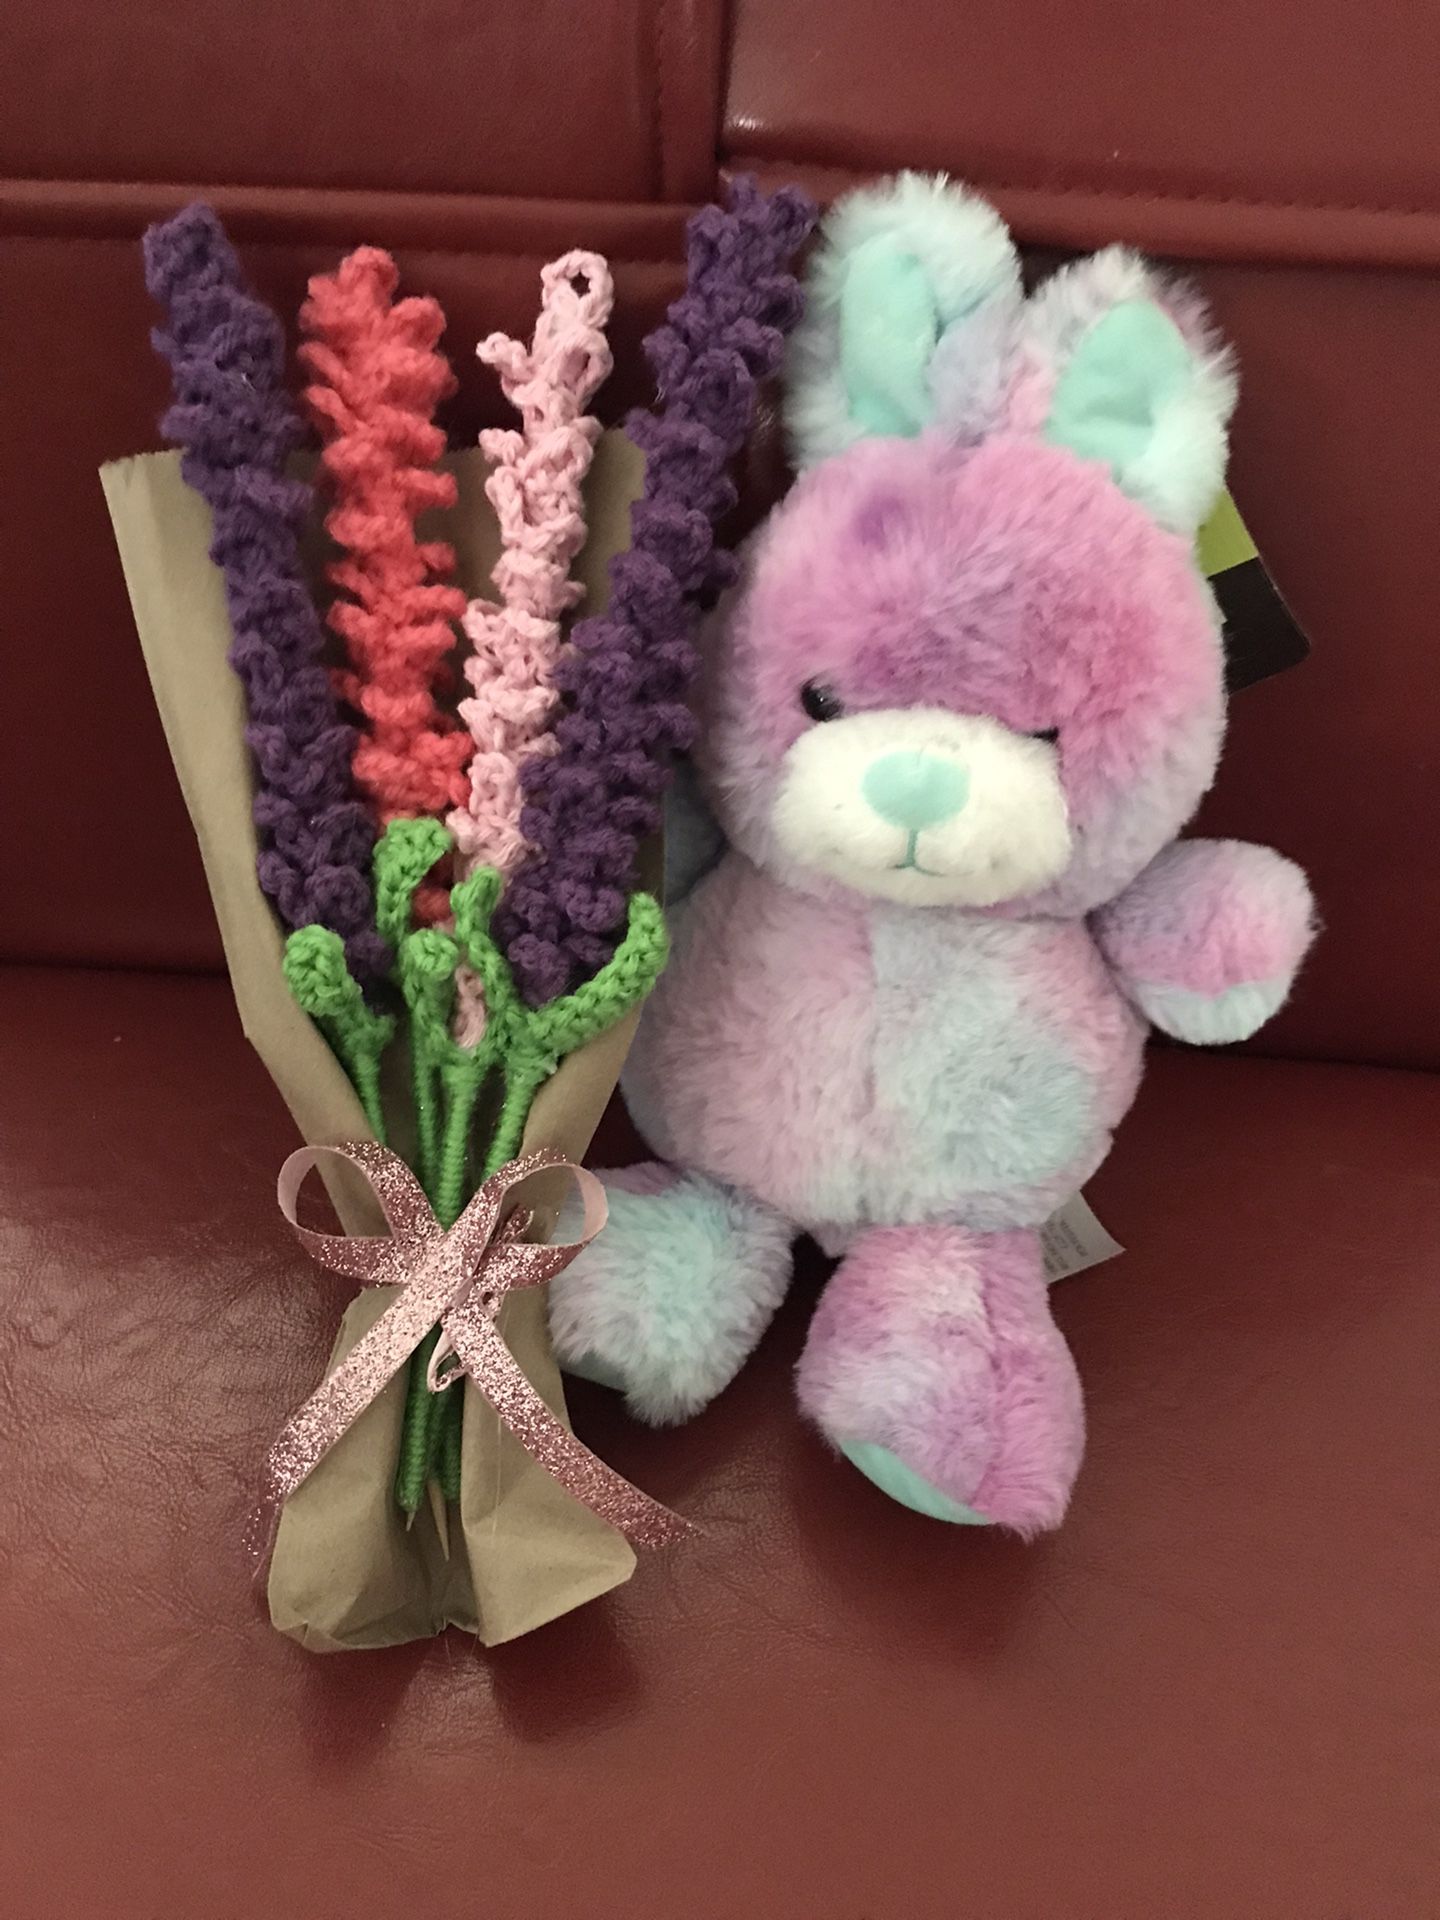 Lavander Flowers And One Rabbit All For $30